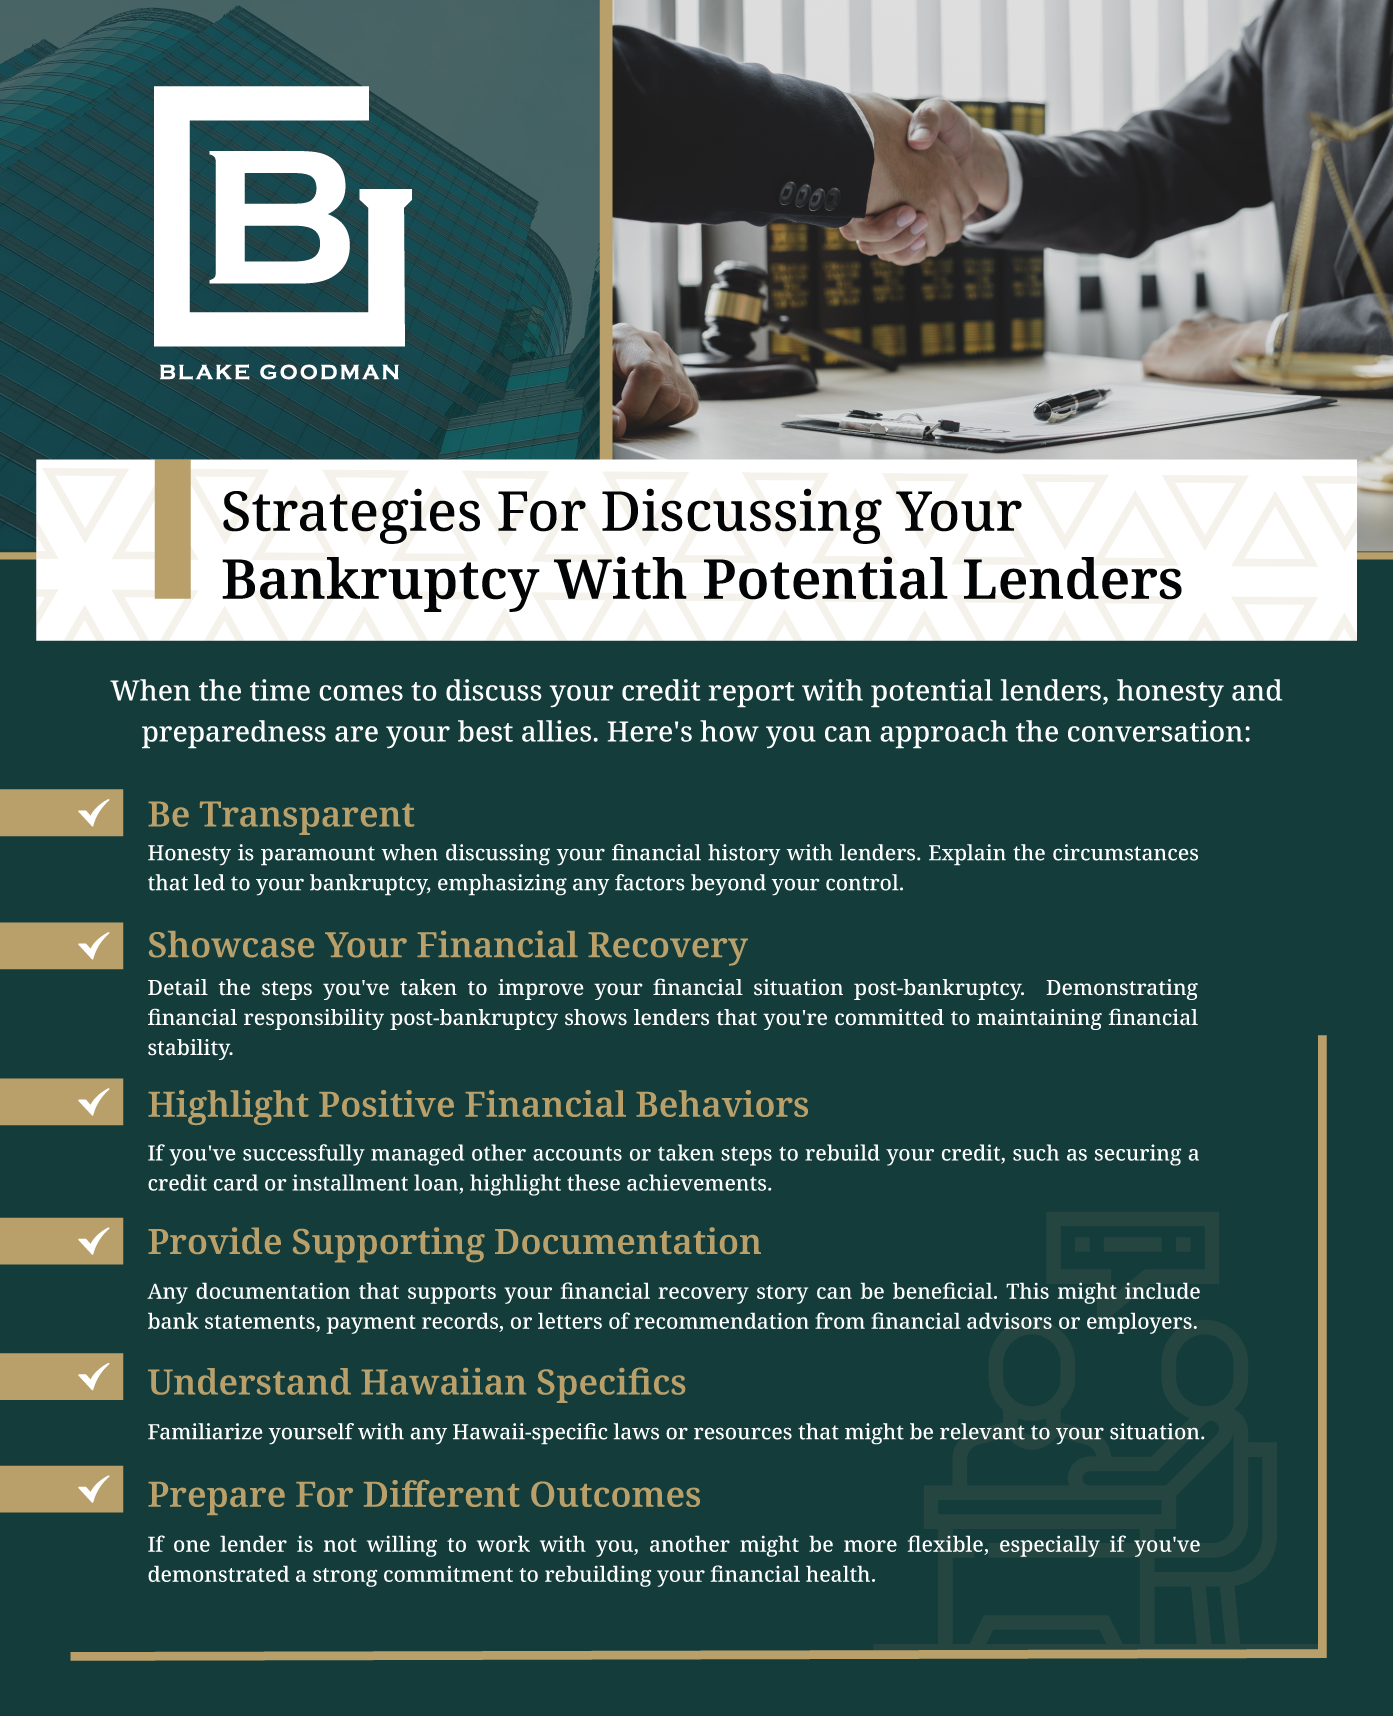 An infographic that explains the strategies for discussing your bankruptcy with potential lenders